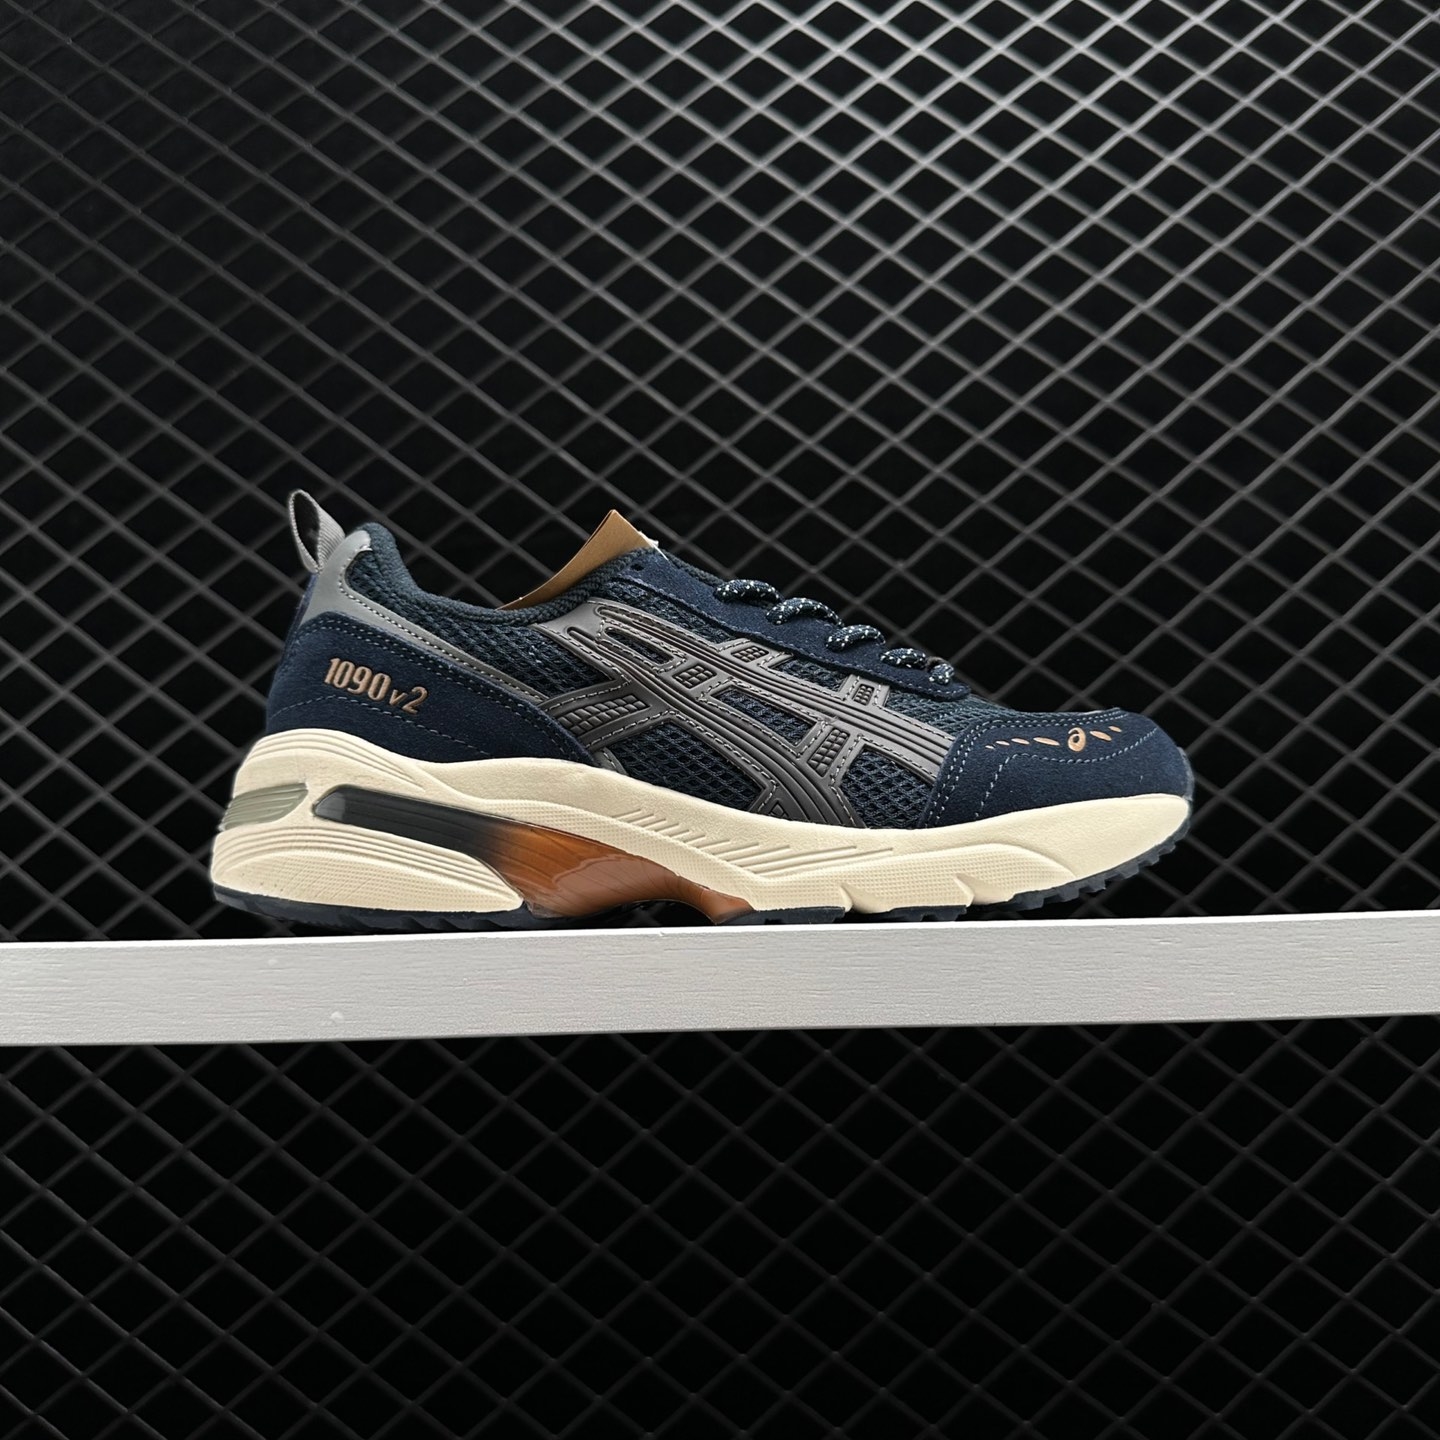 Asics Gel 1090 V2 'French Blue' 1203A224-400 - Shop Now for Classic Style!